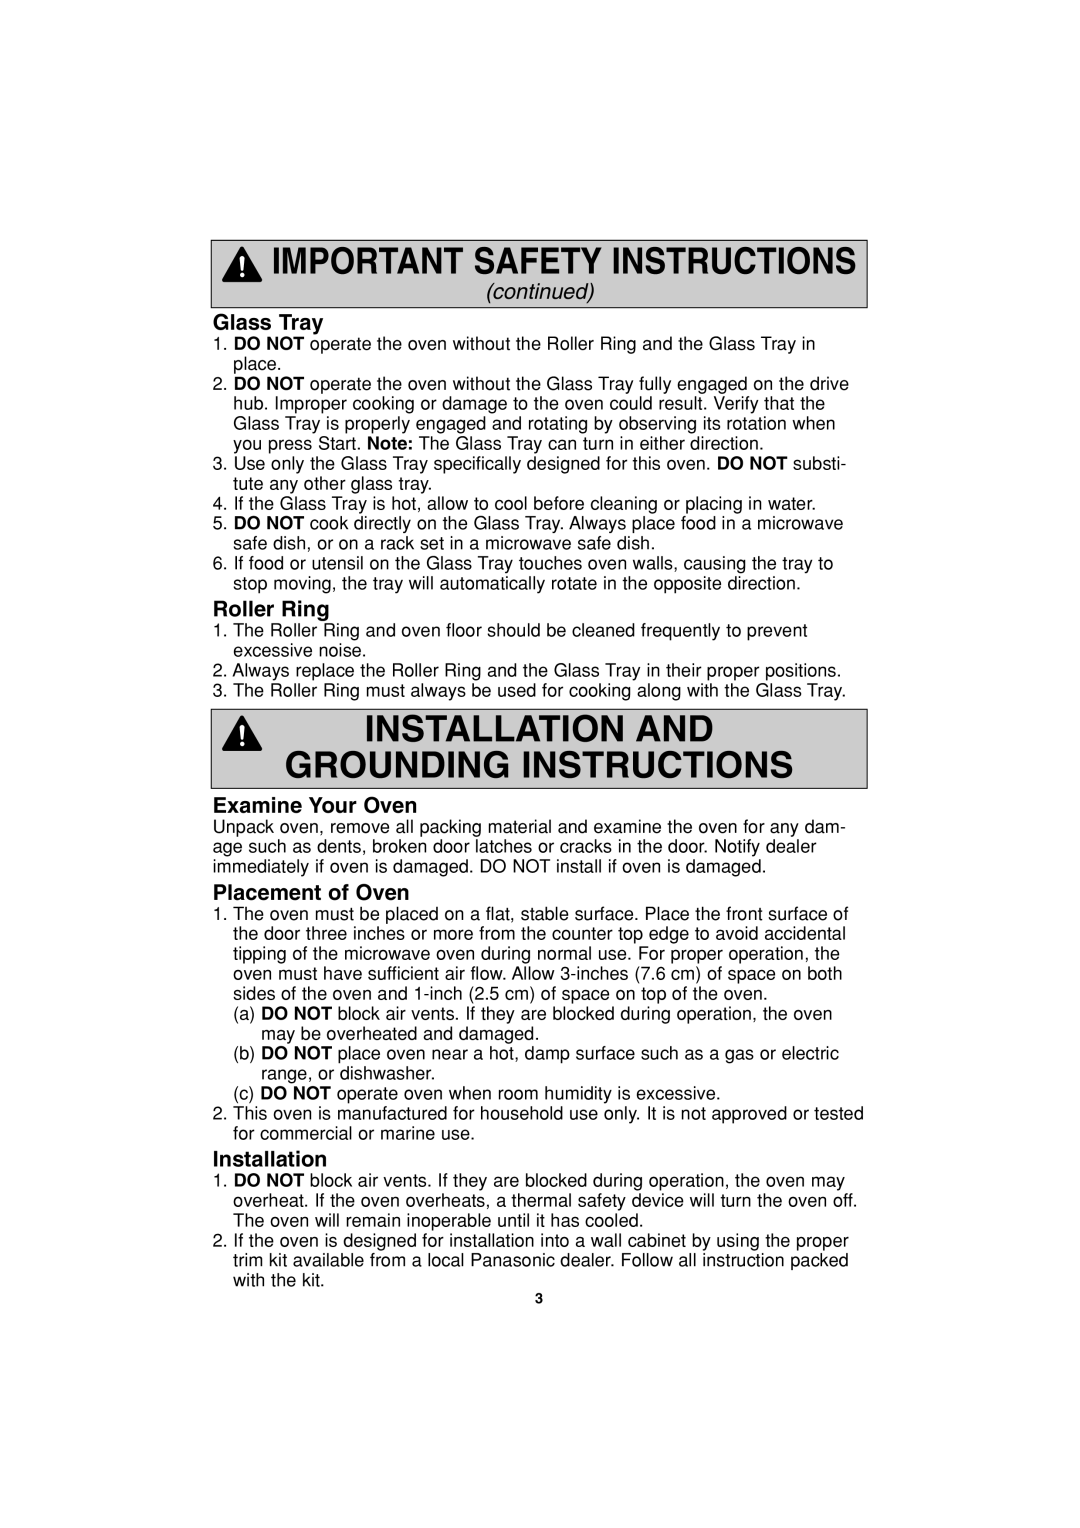 Panasonic NN-S963 Installation And Grounding Instructions, Glass Tray, Roller Ring, Examine Your Oven, Placement of Oven 